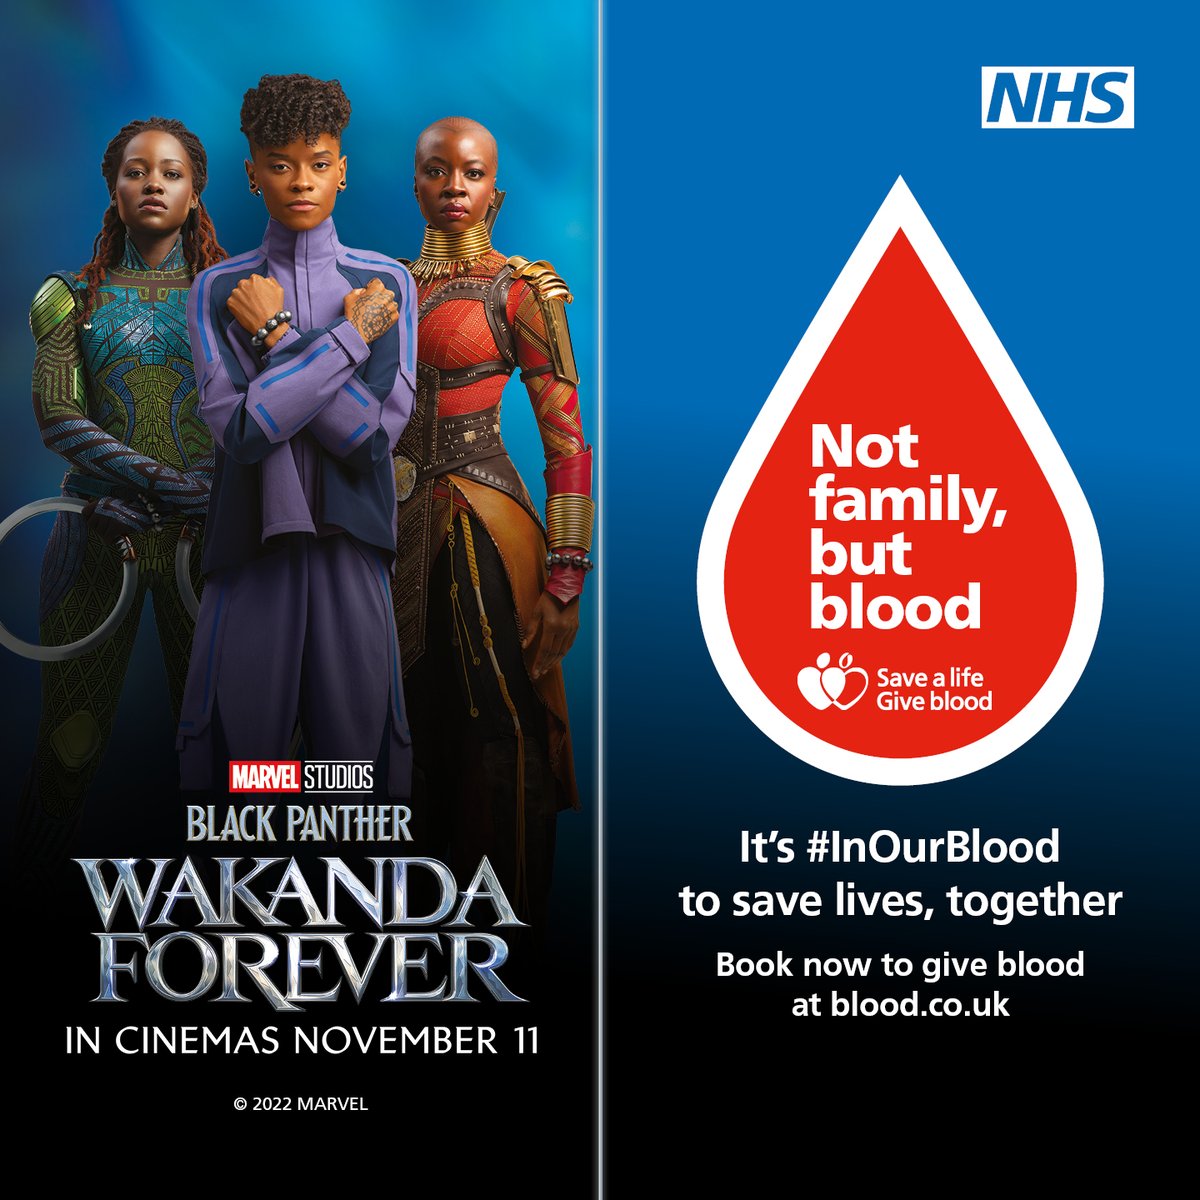 More Black blood donors are urgently needed to help treat conditions like sickle cell. @NHSBT has teamed up with @MarvelUK ahead of the release of Black Panther: #WakandaForever to encourage more donors to #GiveBlood. Book now: blood.co.uk #InOurBlood